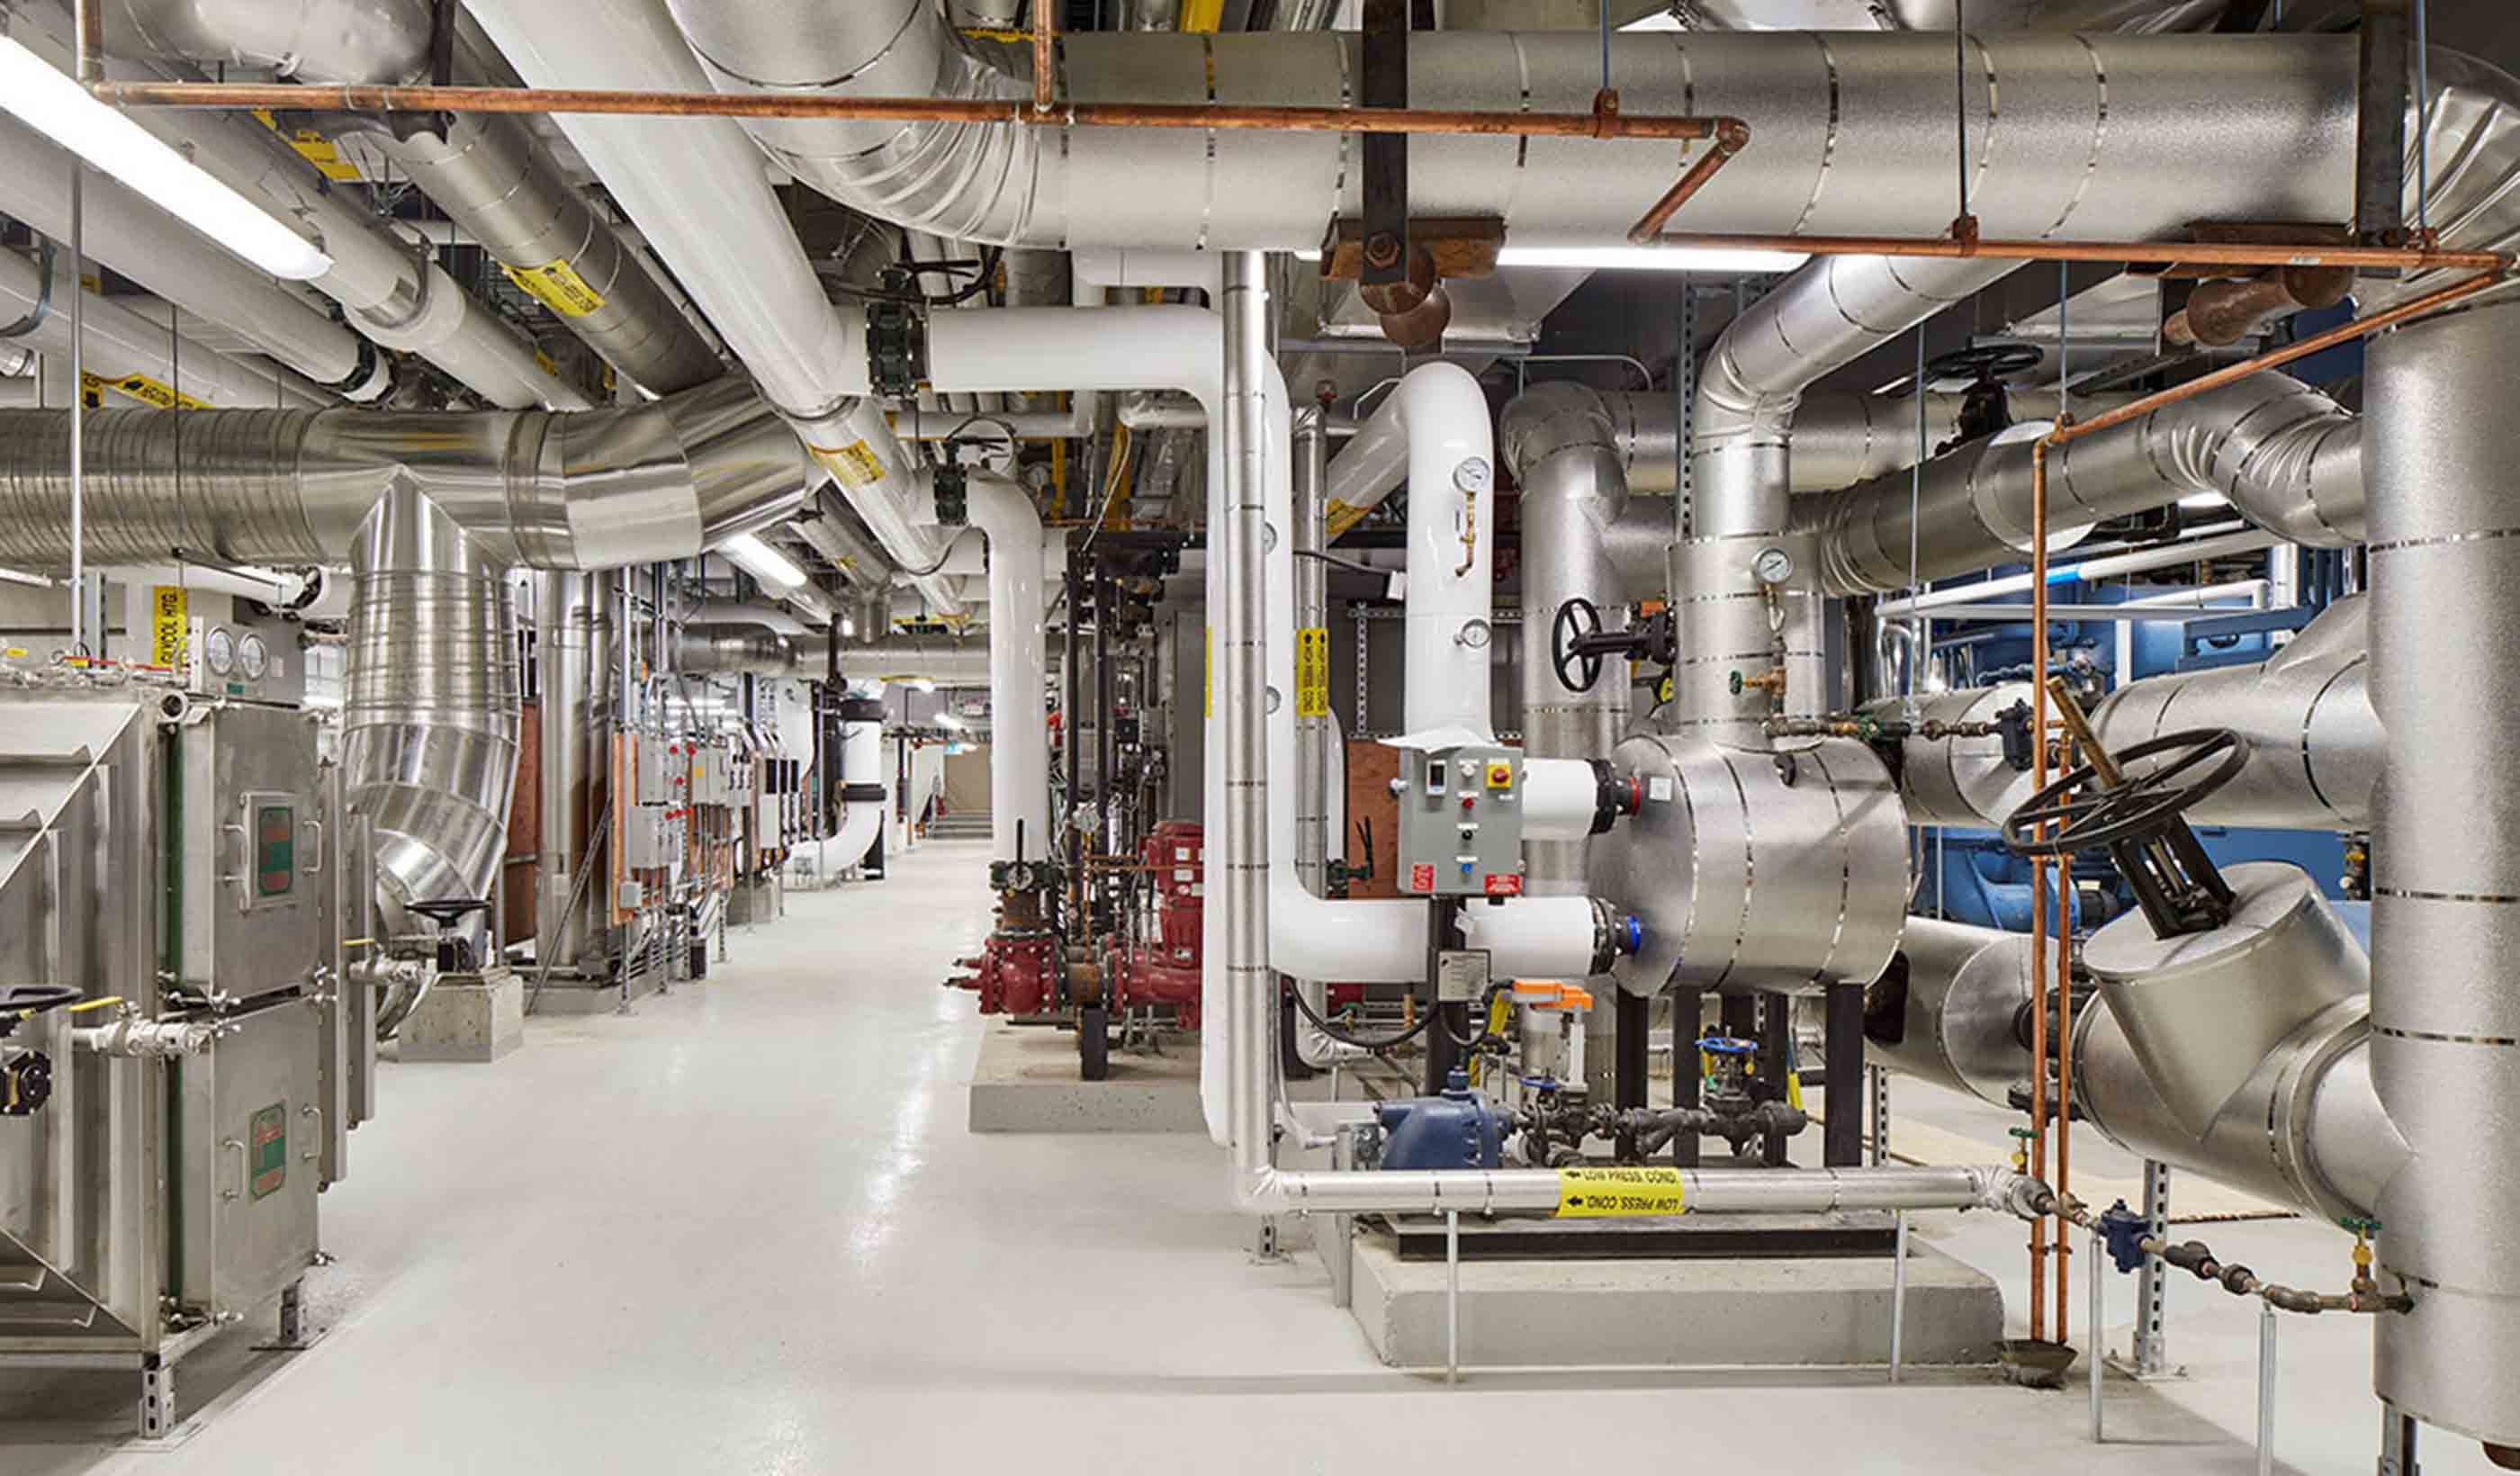 4 keys to keeping mechanical systems running during a hospital renovation